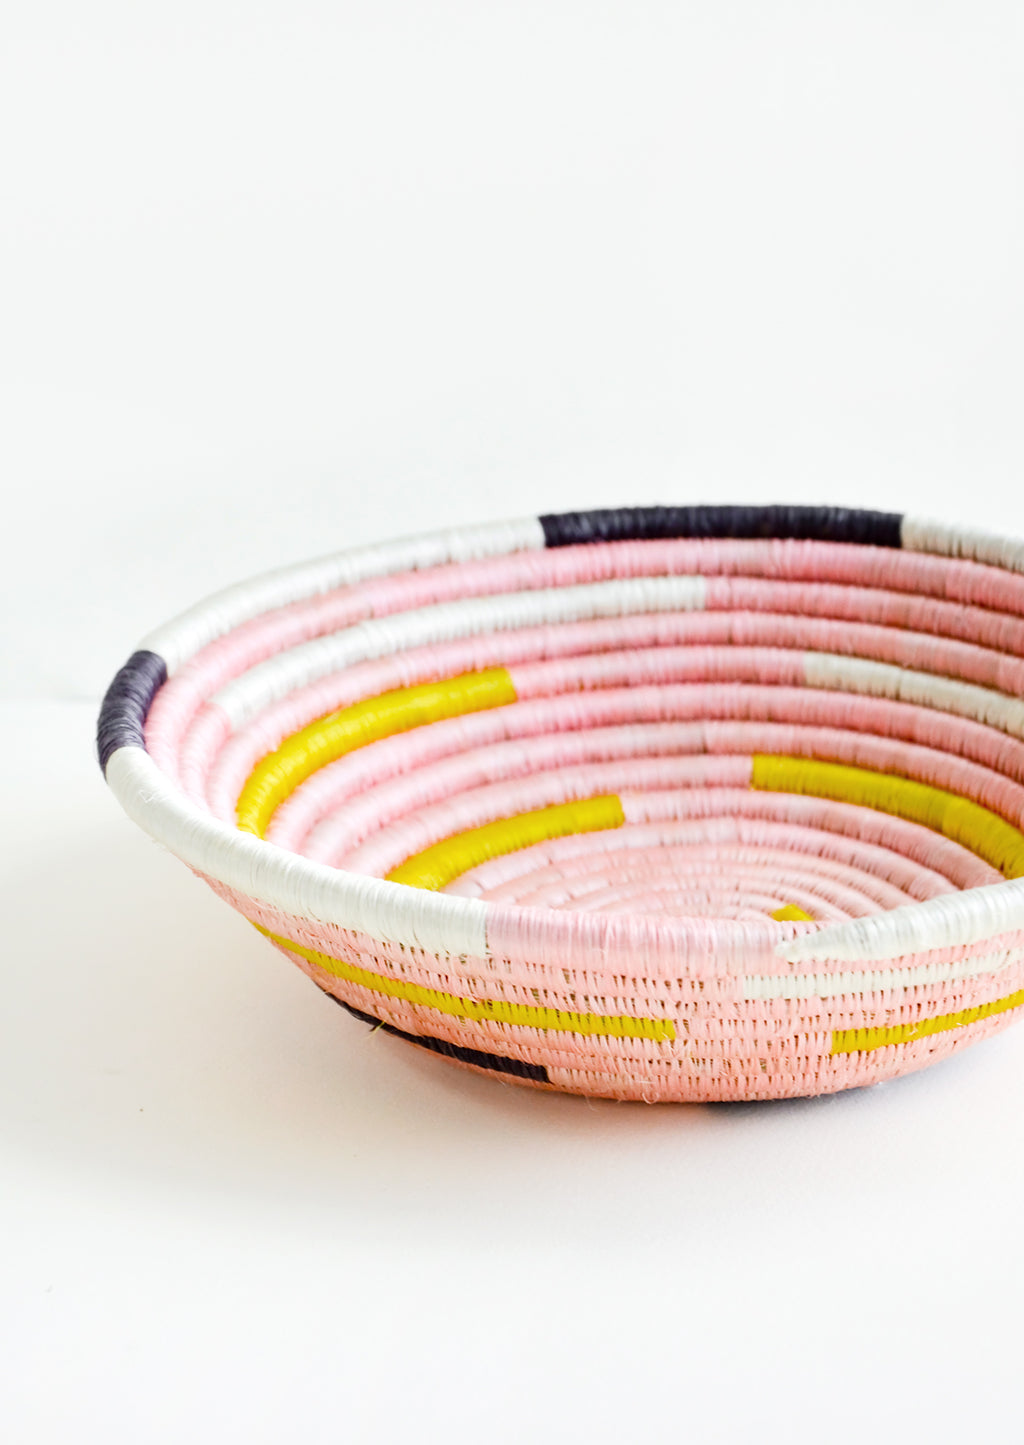 2: Round, shallow bowl made from woven sweetgrass in pink, white, yellow and black.